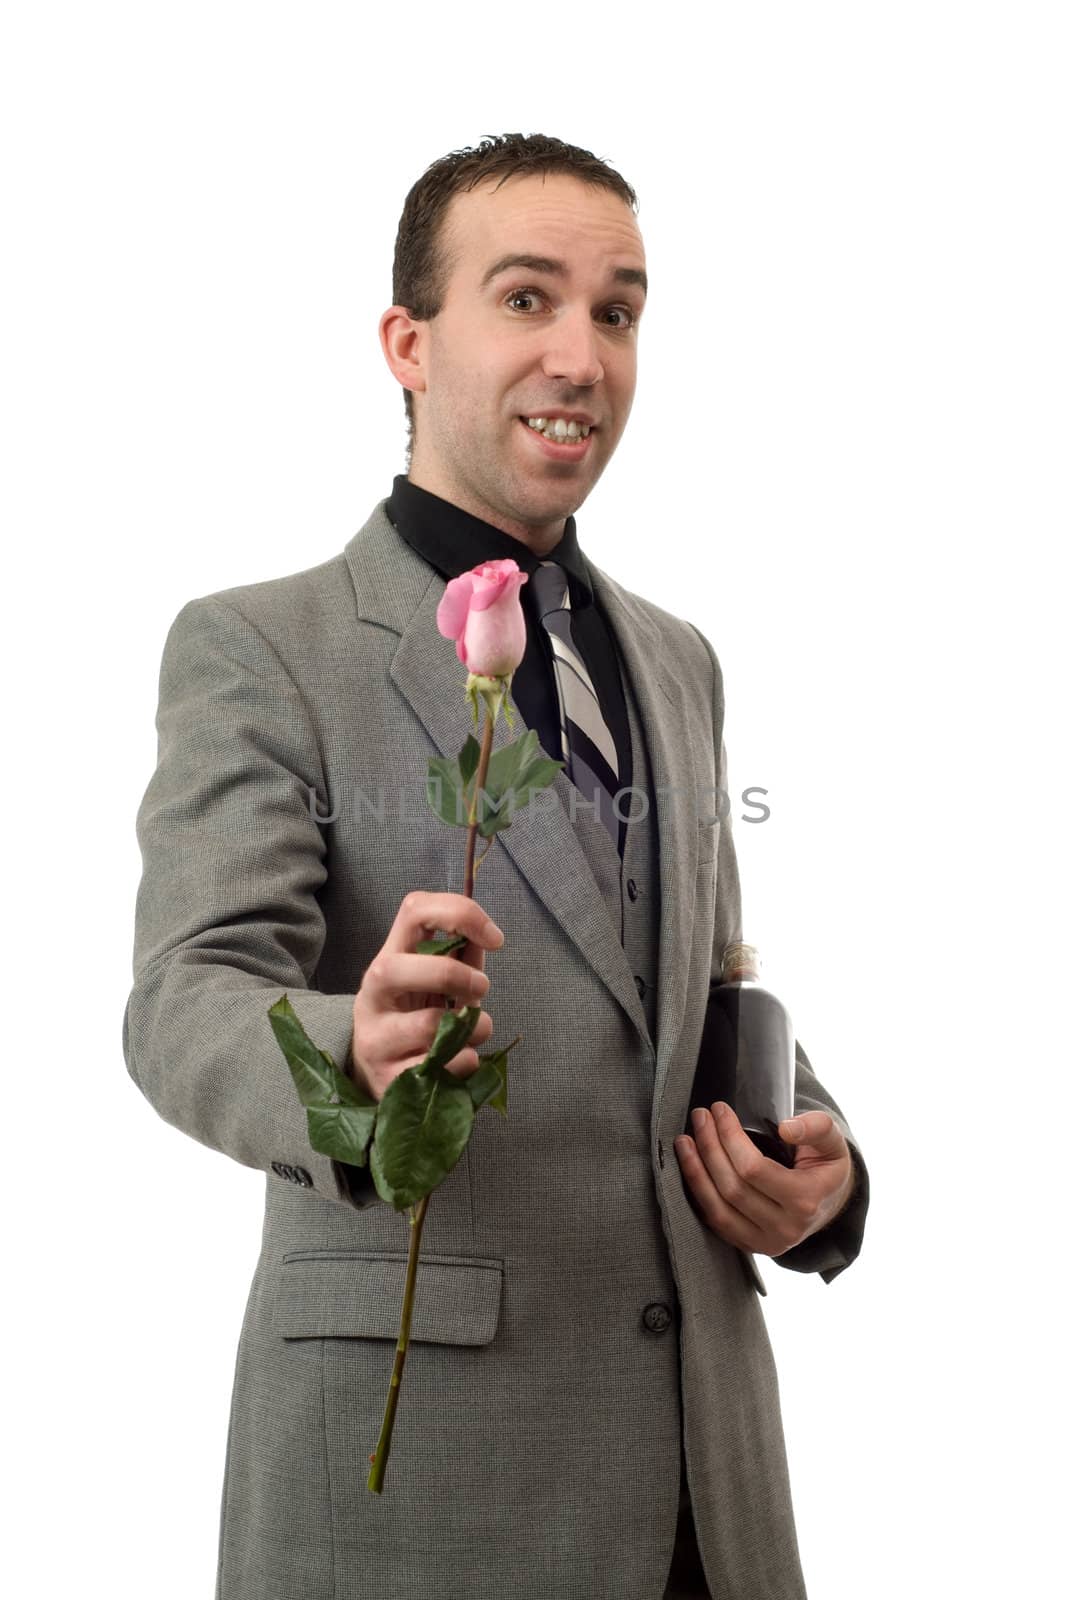 A man wearing a suit and tie, holding a rose and a bottle of champagne, isolated against a white background